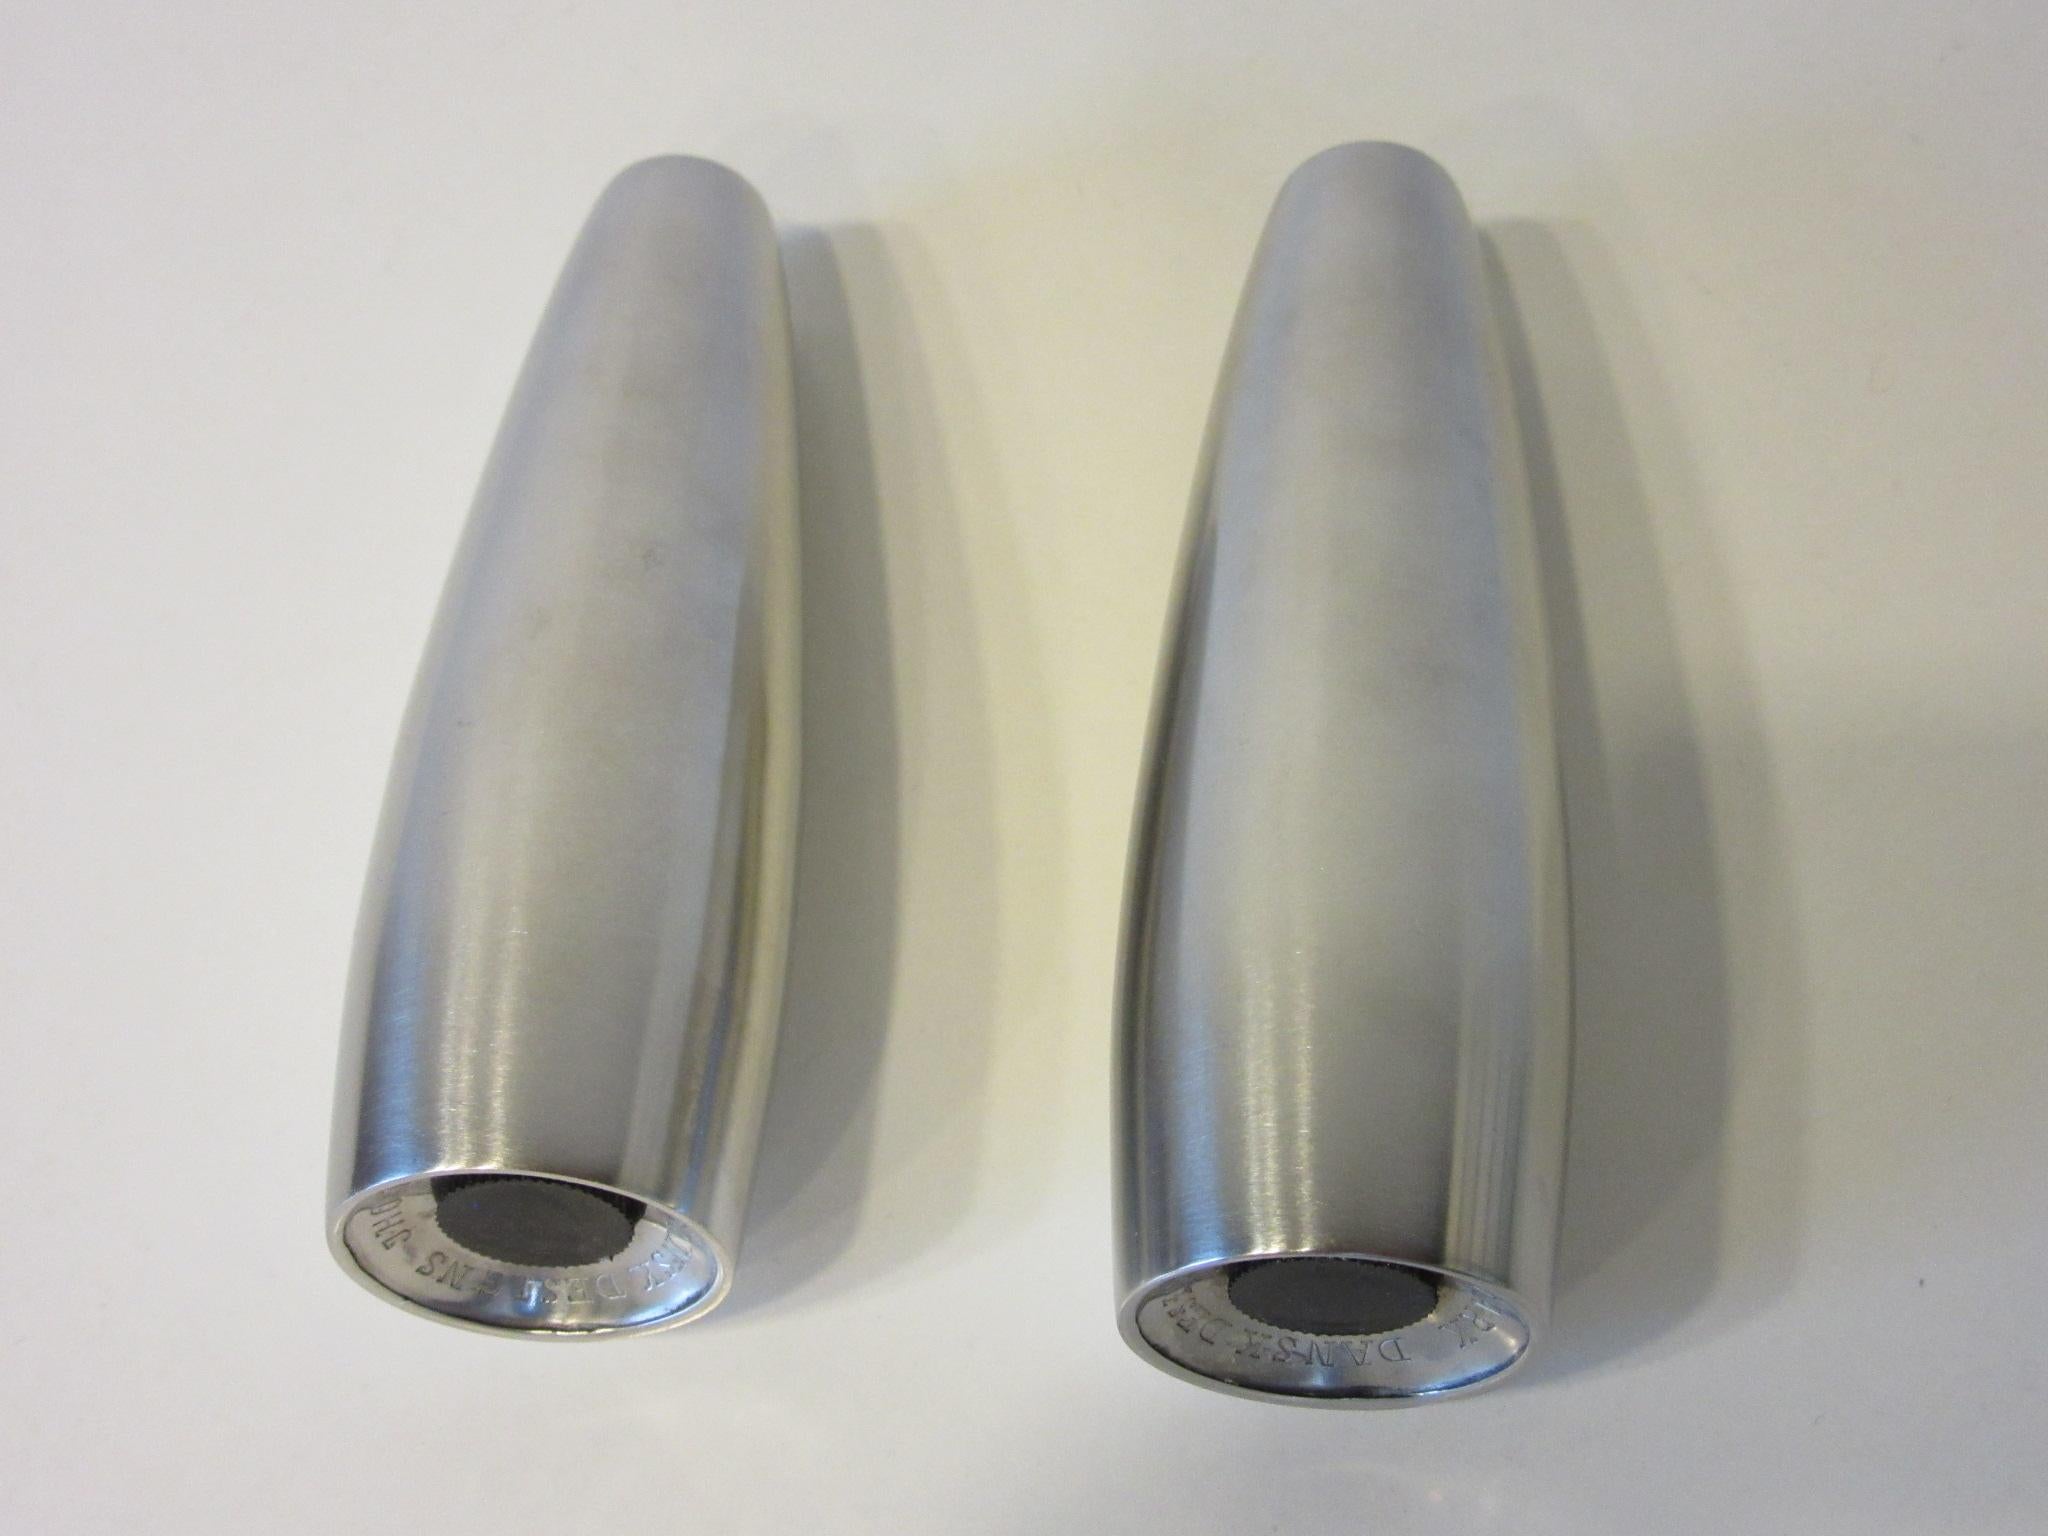 A pair of tapered stainless steel salt and pepper shakers by designer Jens Quistgaard stamped to the bottom Dansk Designs JHQ Denmark.